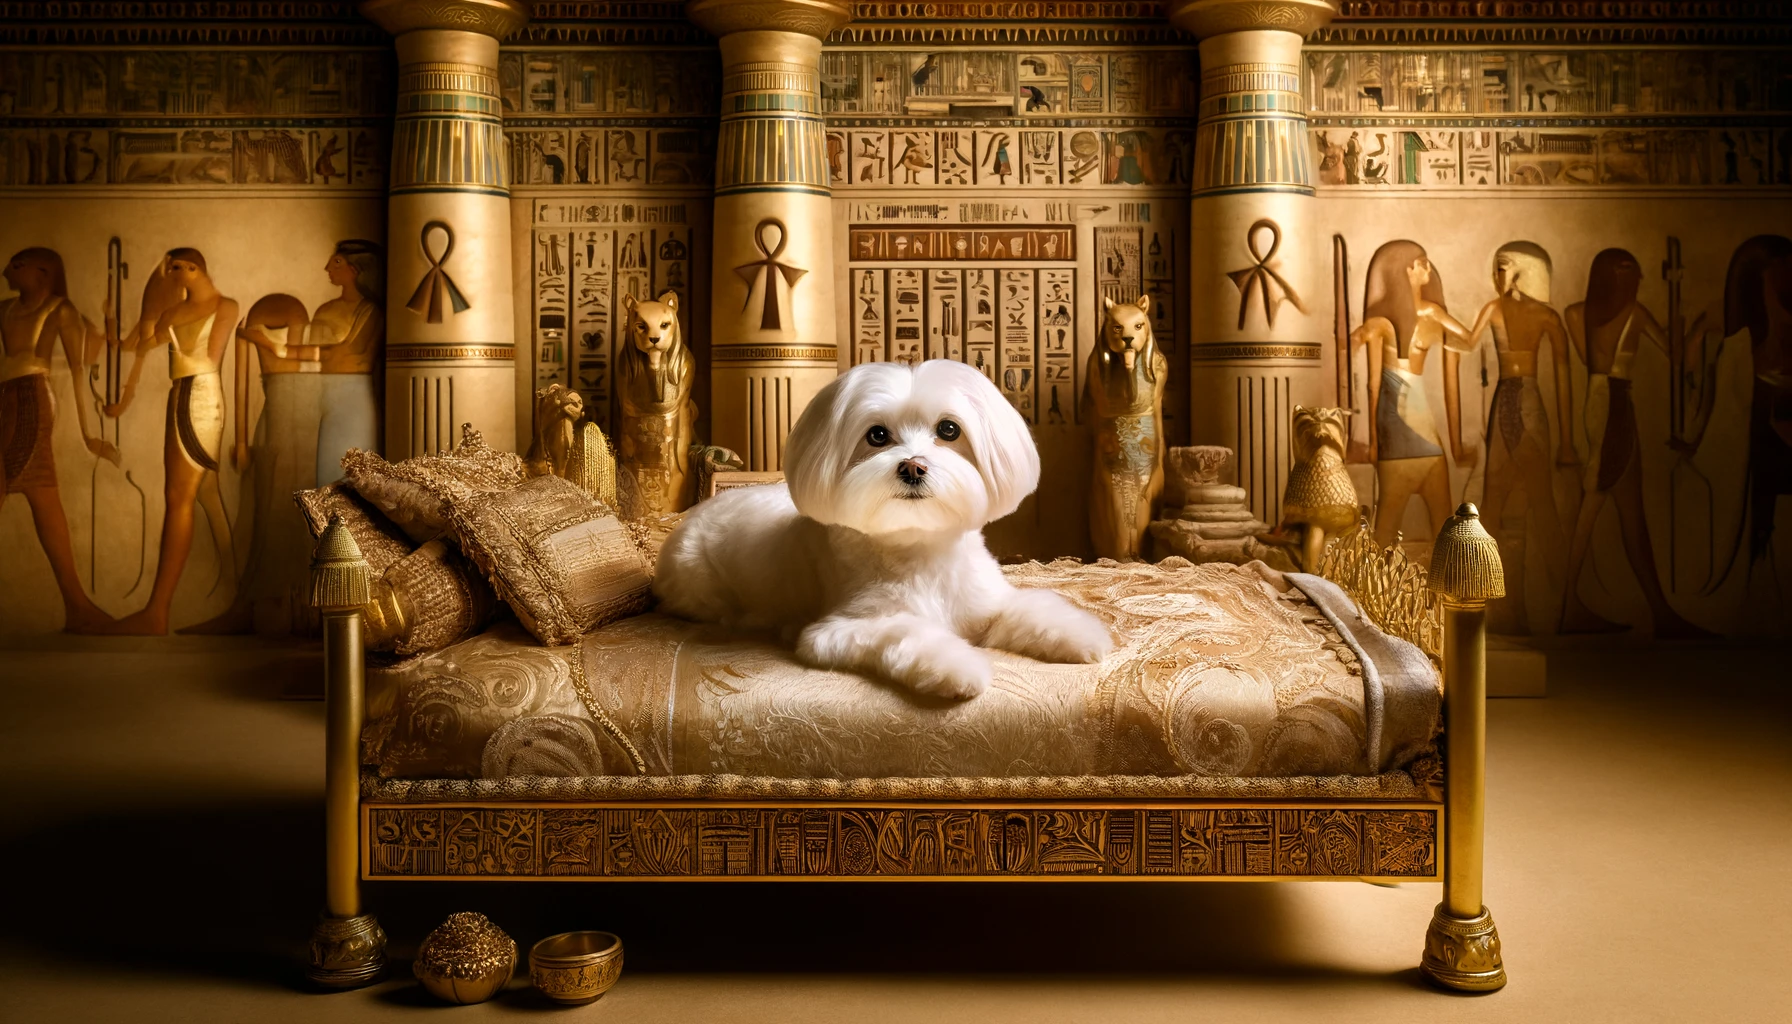 a portrayal of a maltese dog in ancient Egypt 